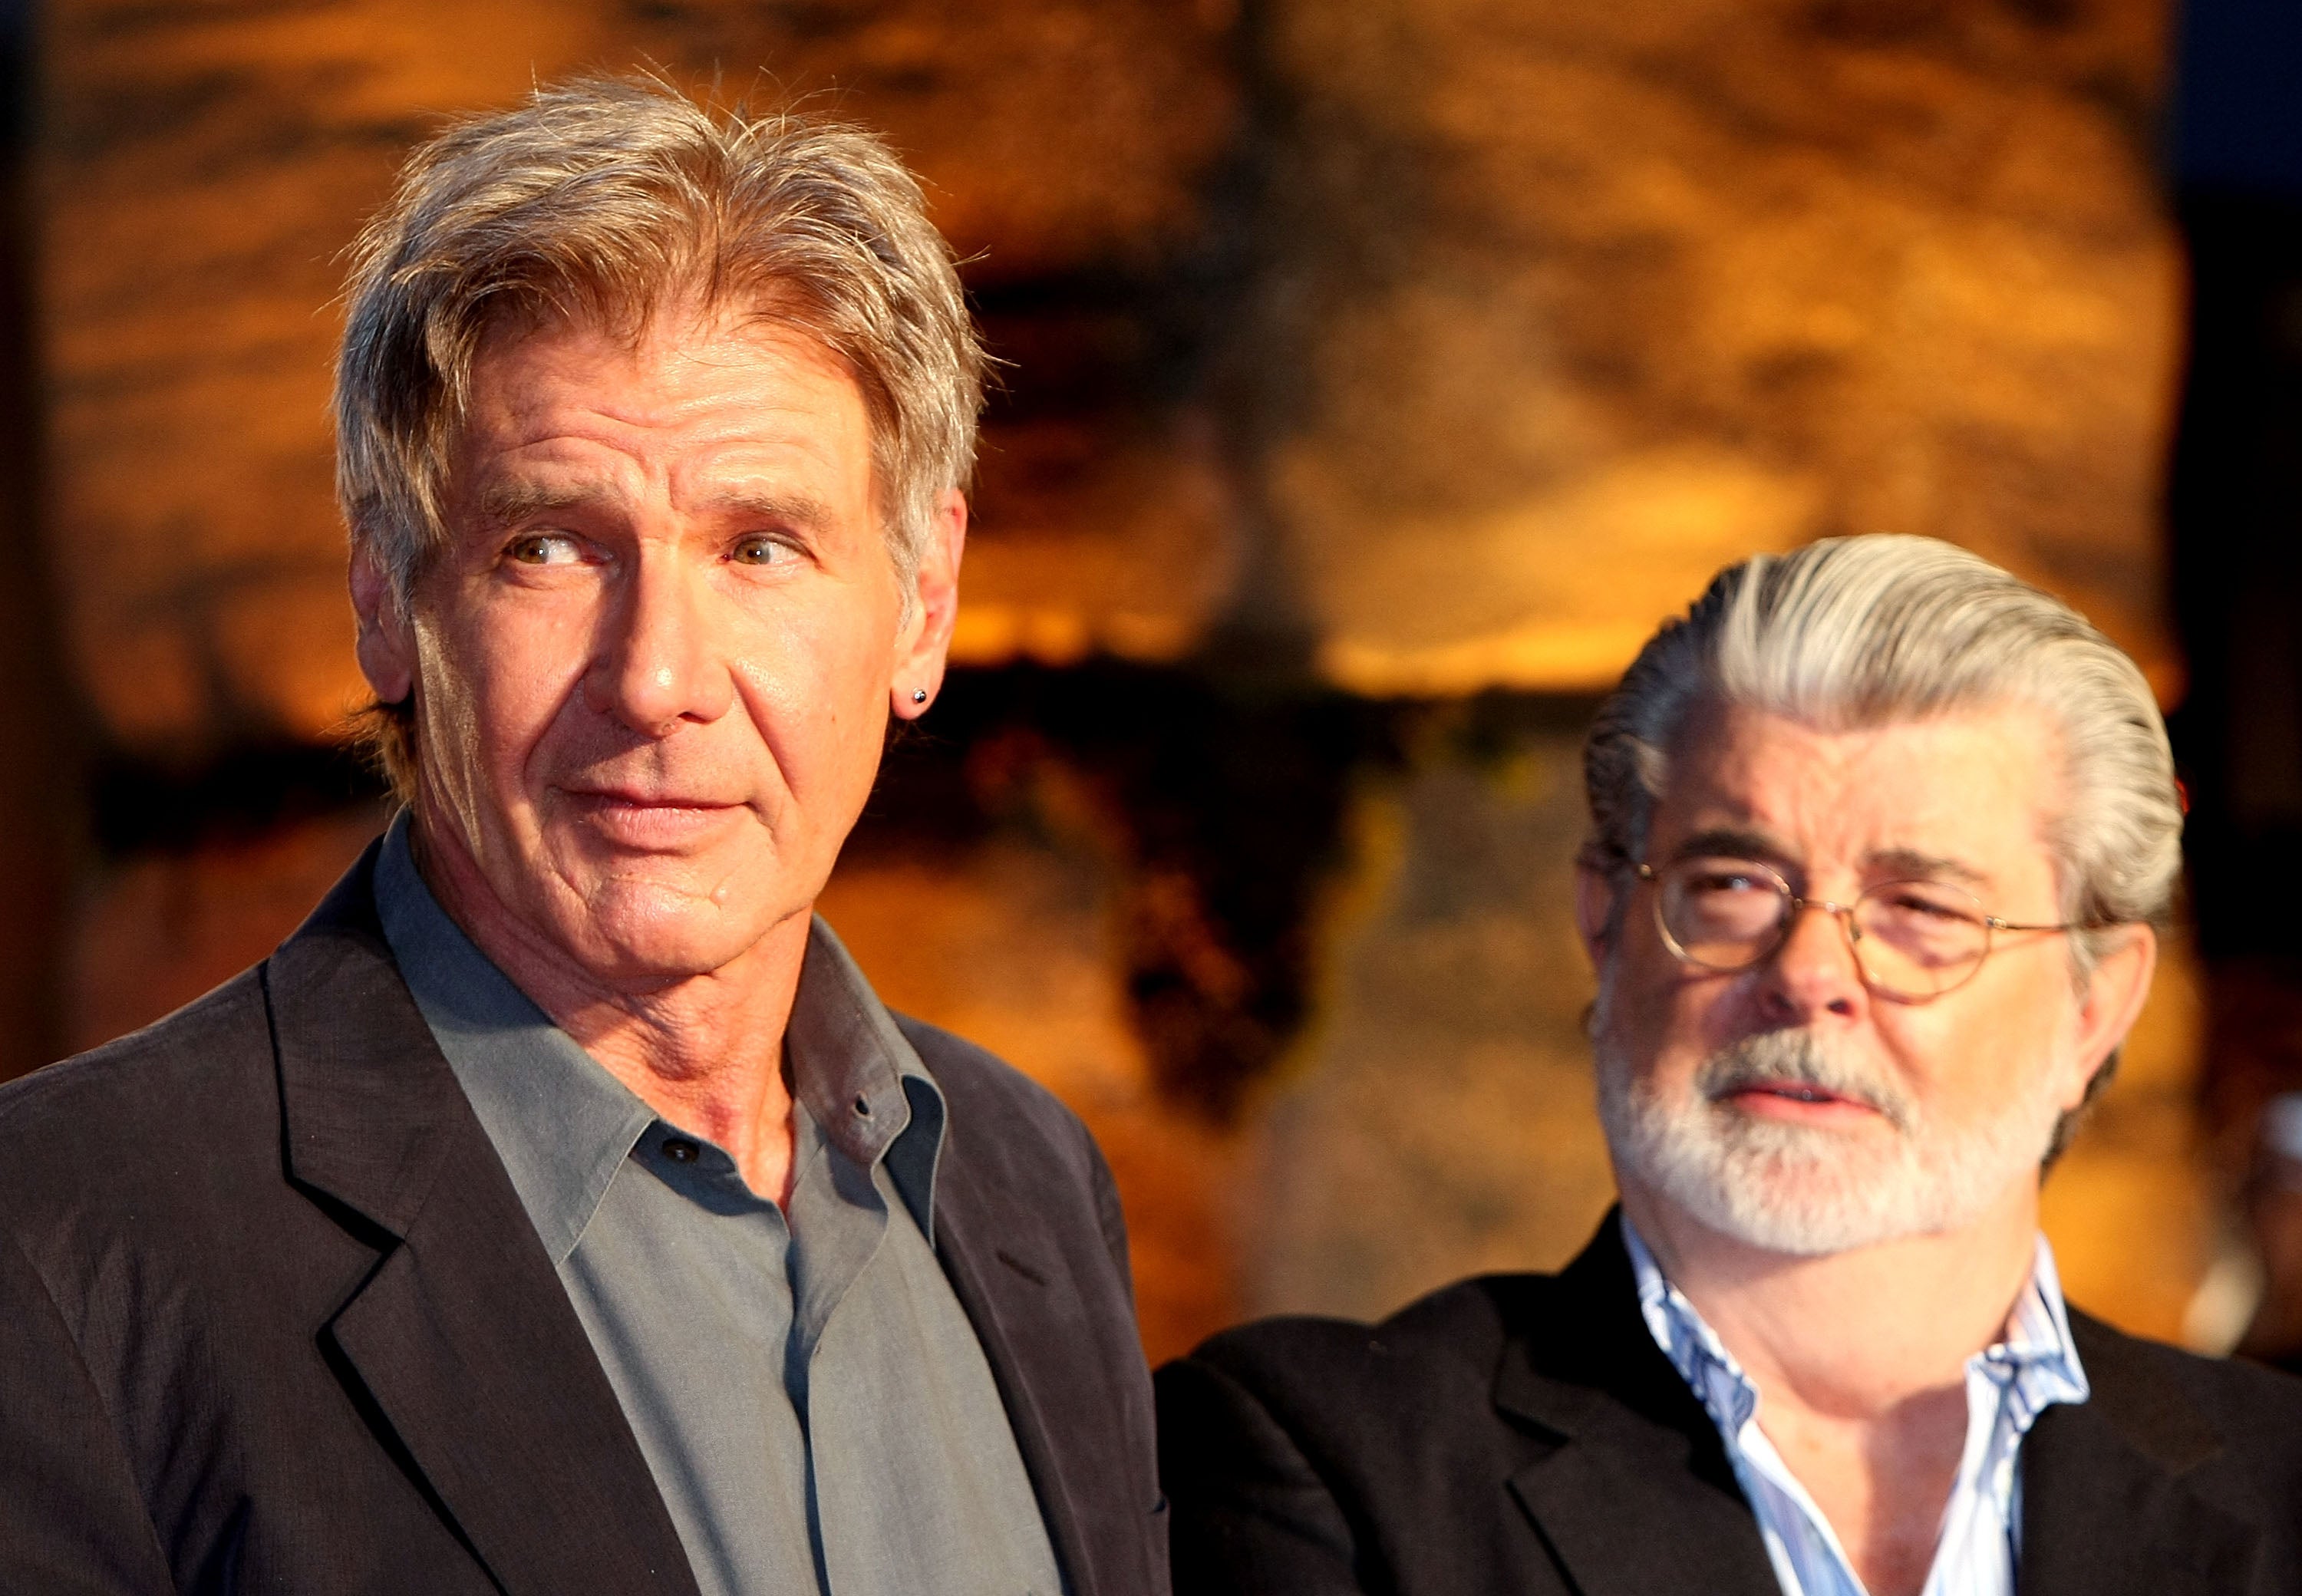 Harrison Ford and George Lucas at the Japanese premiere of ‘Indiana Jones and the Kingdom of the Crystal Skull’ in 2008.